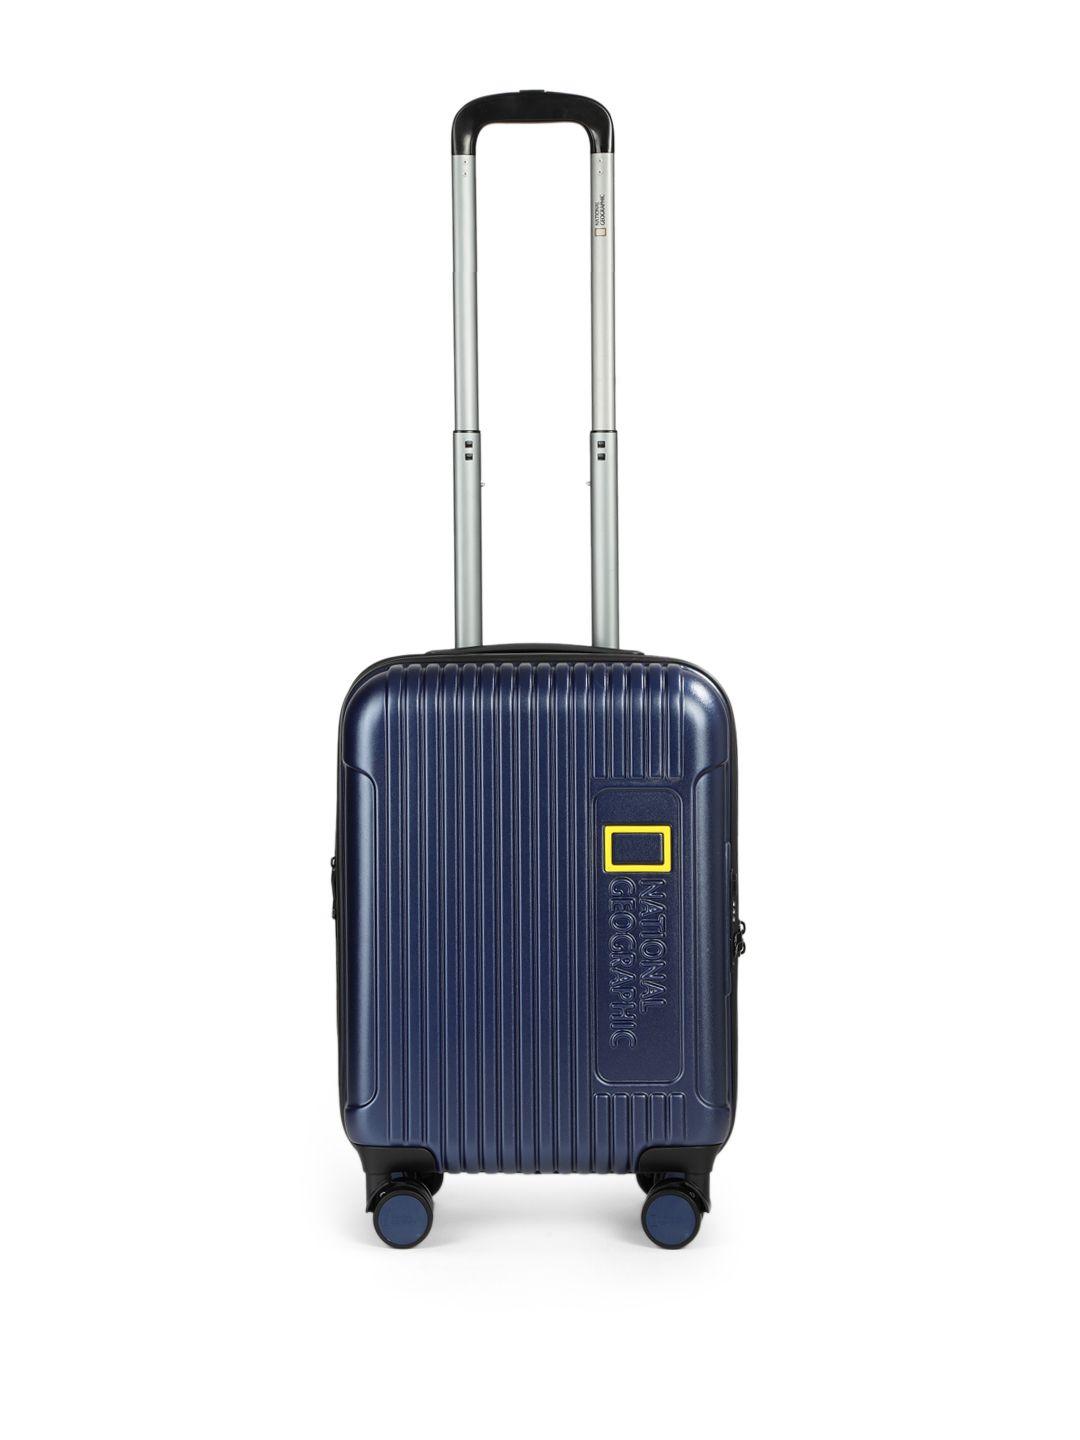 national geographic navy blue compact trolley cabin suitcase